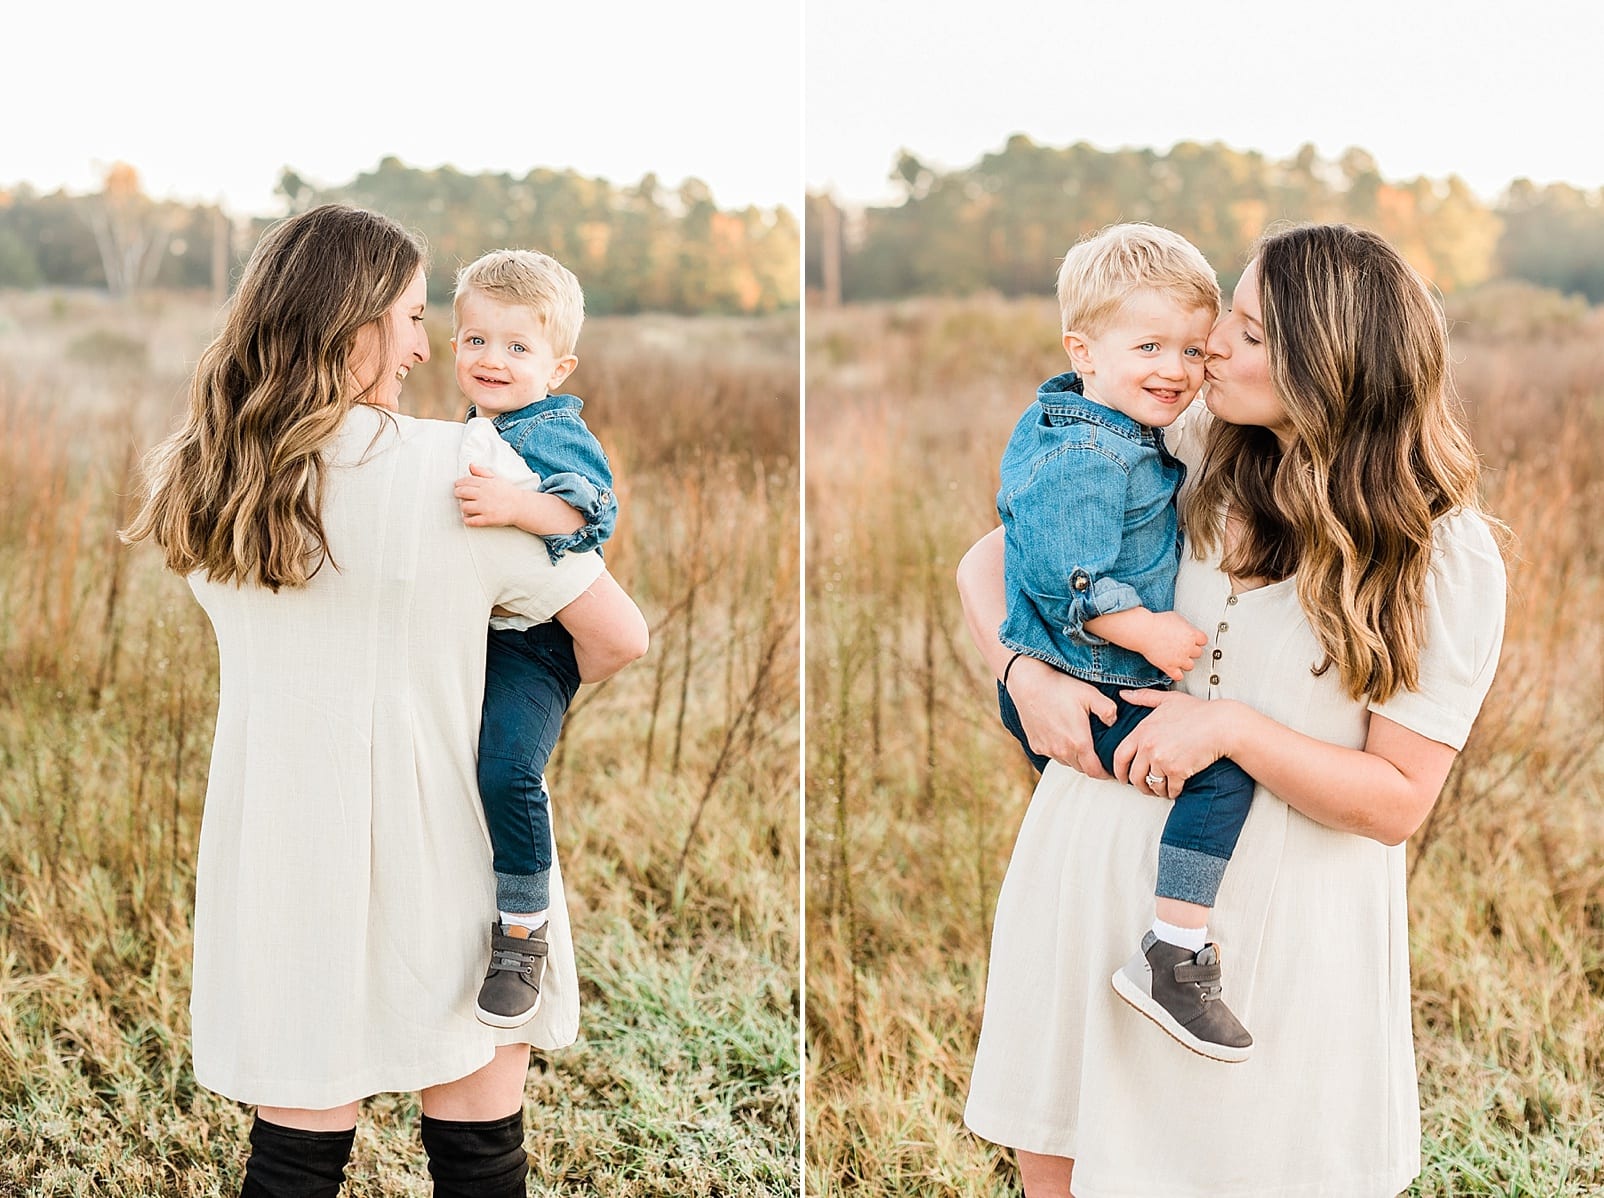 Wake forest mother holding her two year old son and kissing him on the cheek in front of a field photo